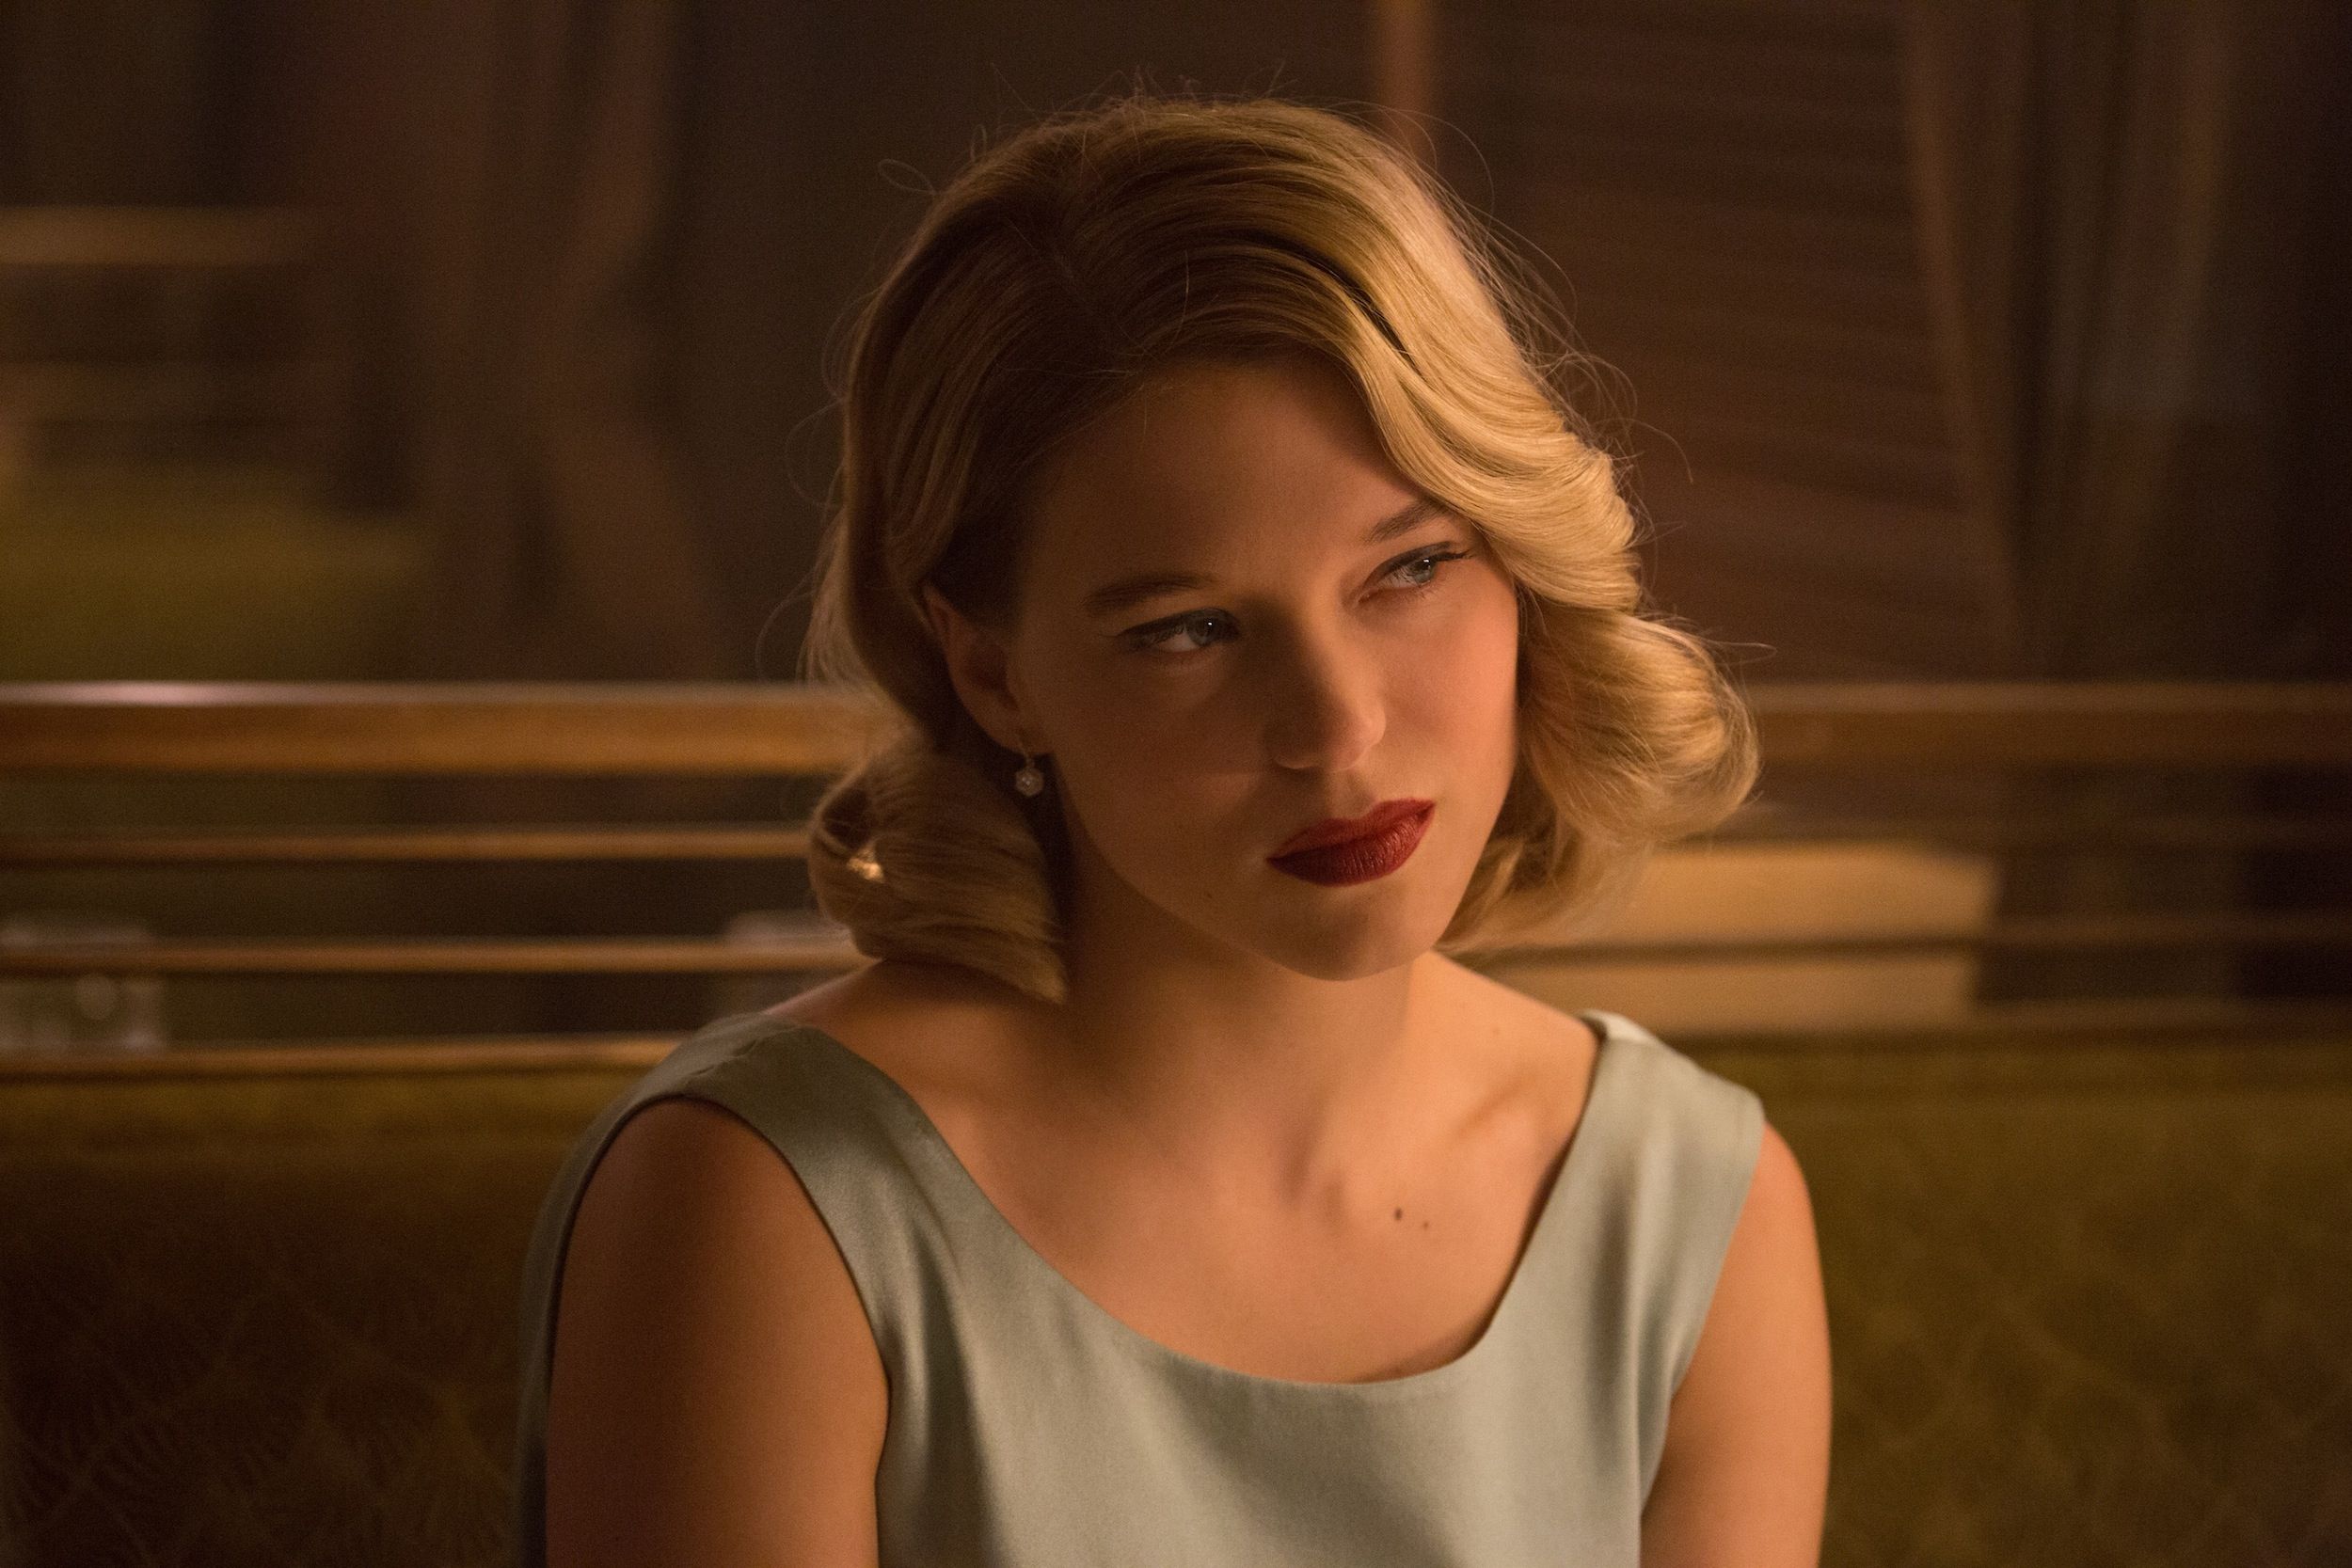 Spectre' stunner Lea Seydoux not just another sexual conquest for James  Bond – New York Daily News